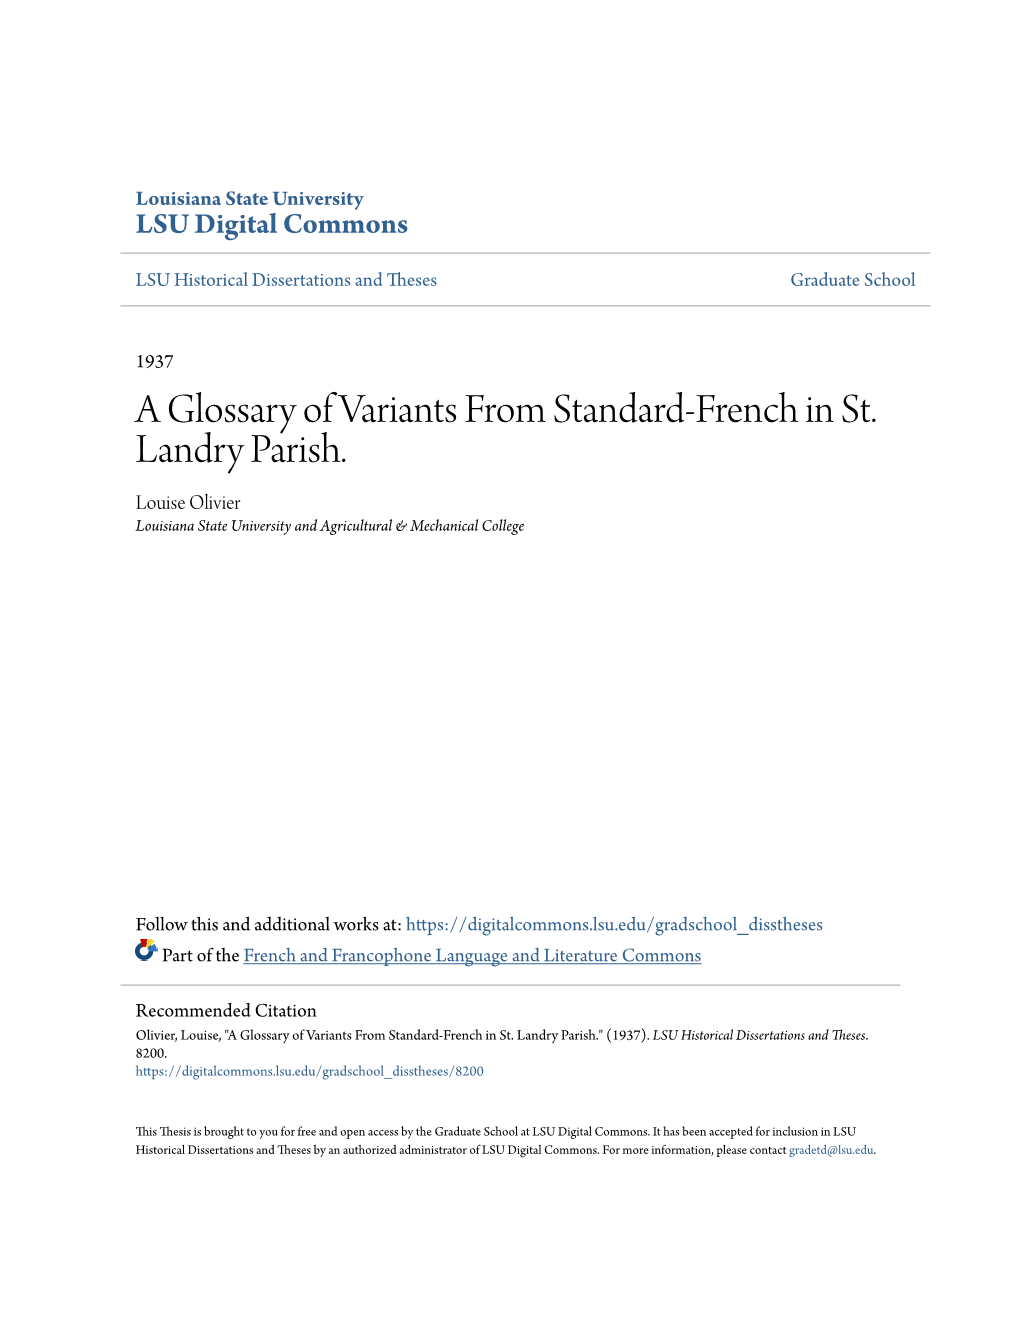 A Glossary of Variants from Standard-French in St. Landry Parish. Louise Olivier Louisiana State University and Agricultural & Mechanical College